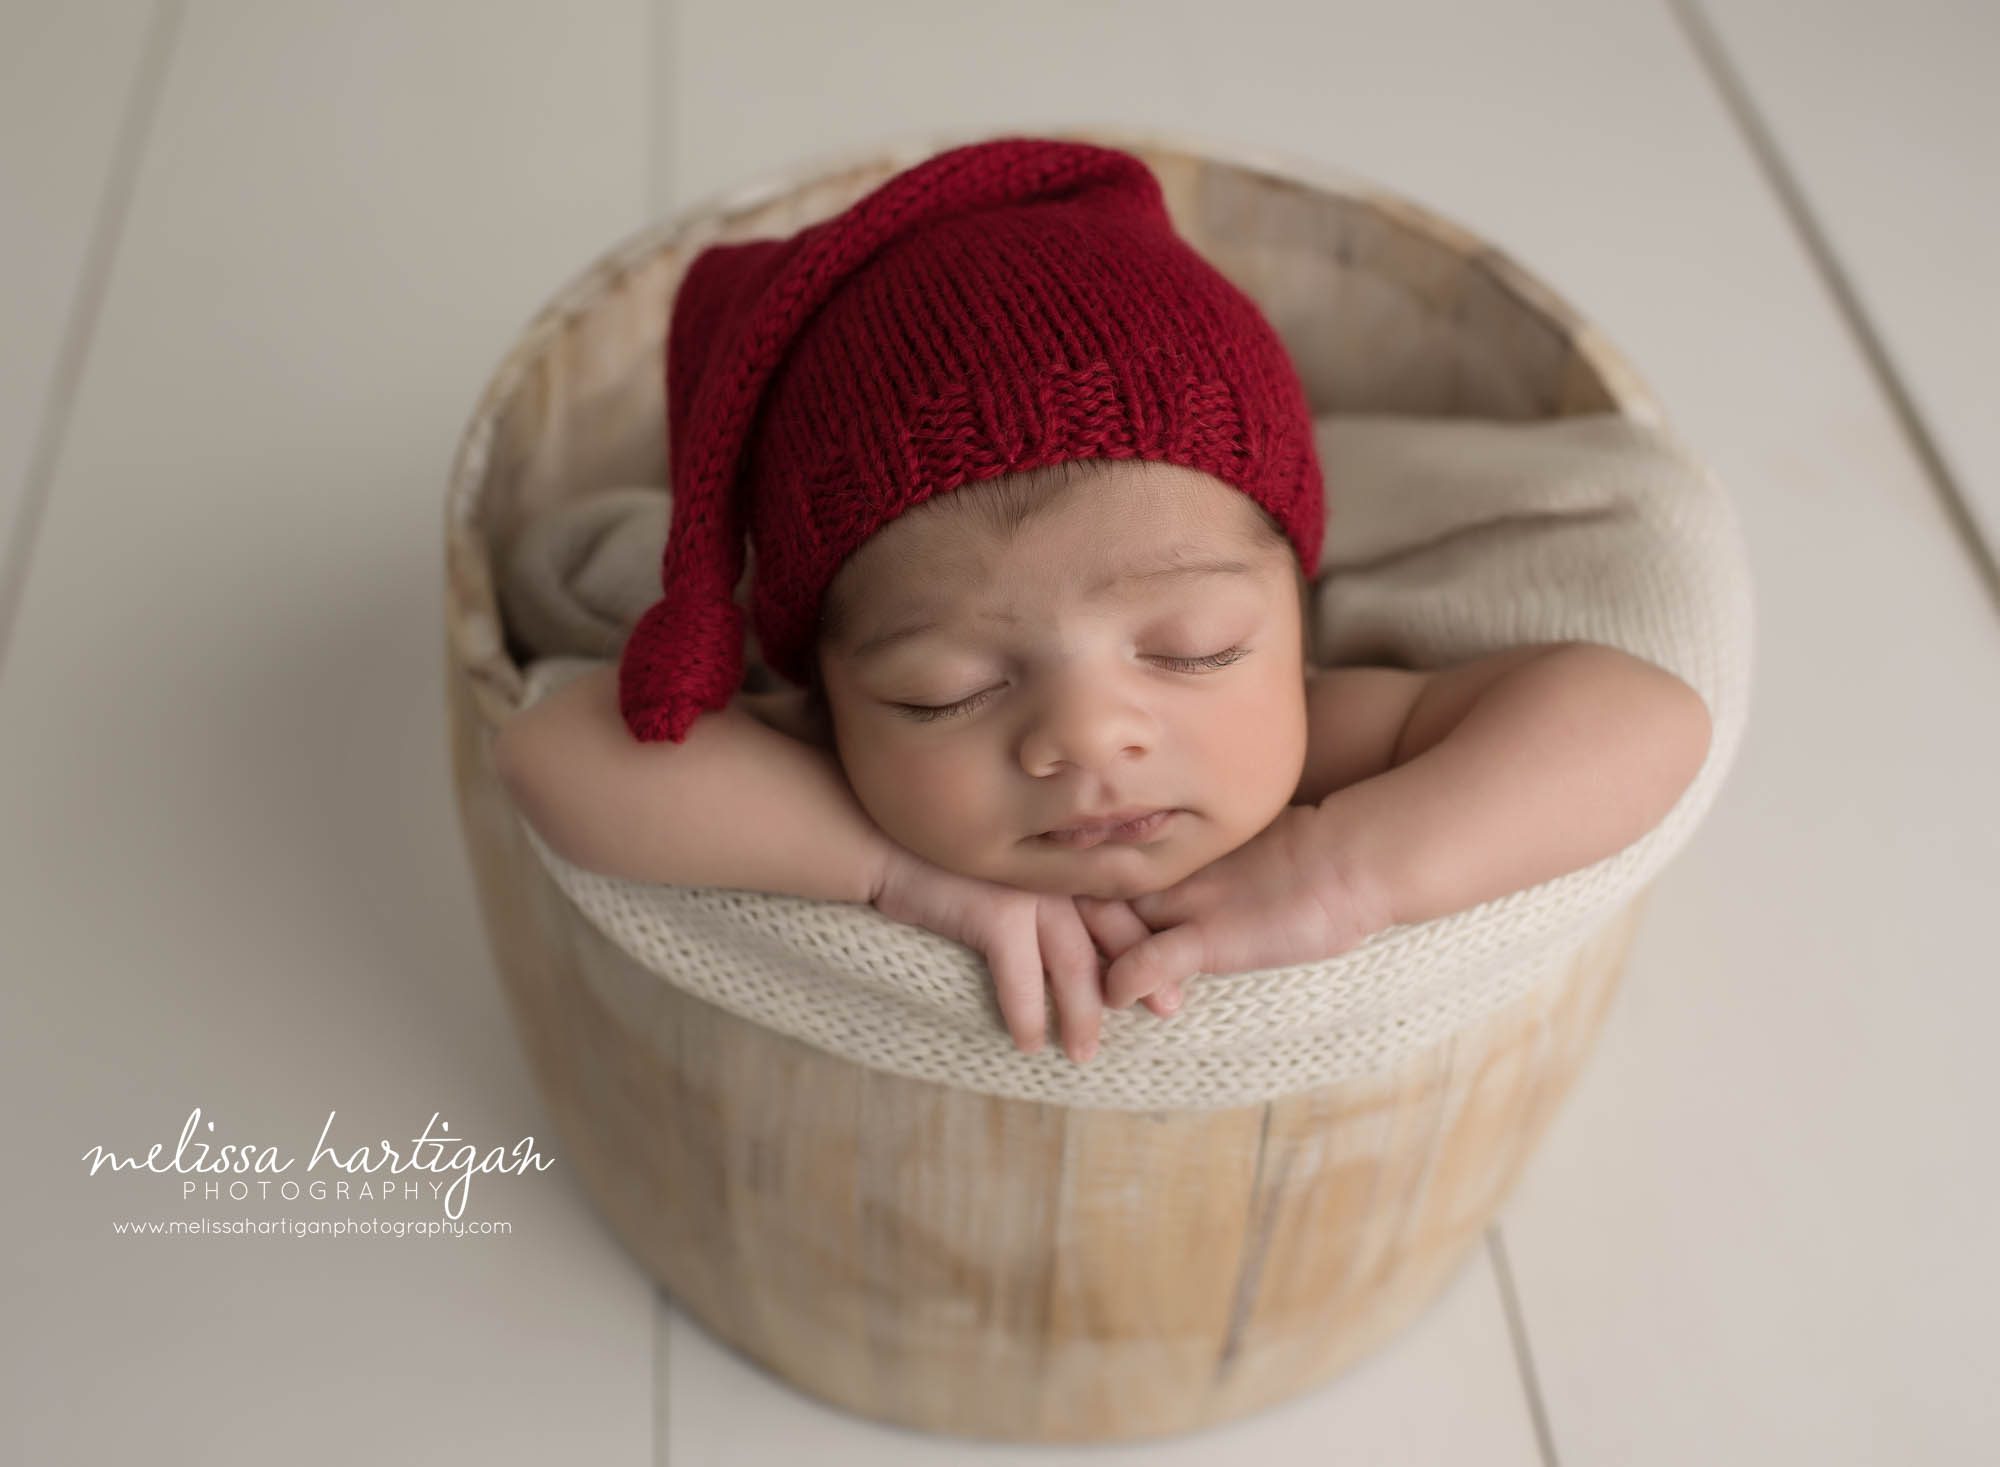 newborn baby boy posed in wooden barrel wearing red knitted hat